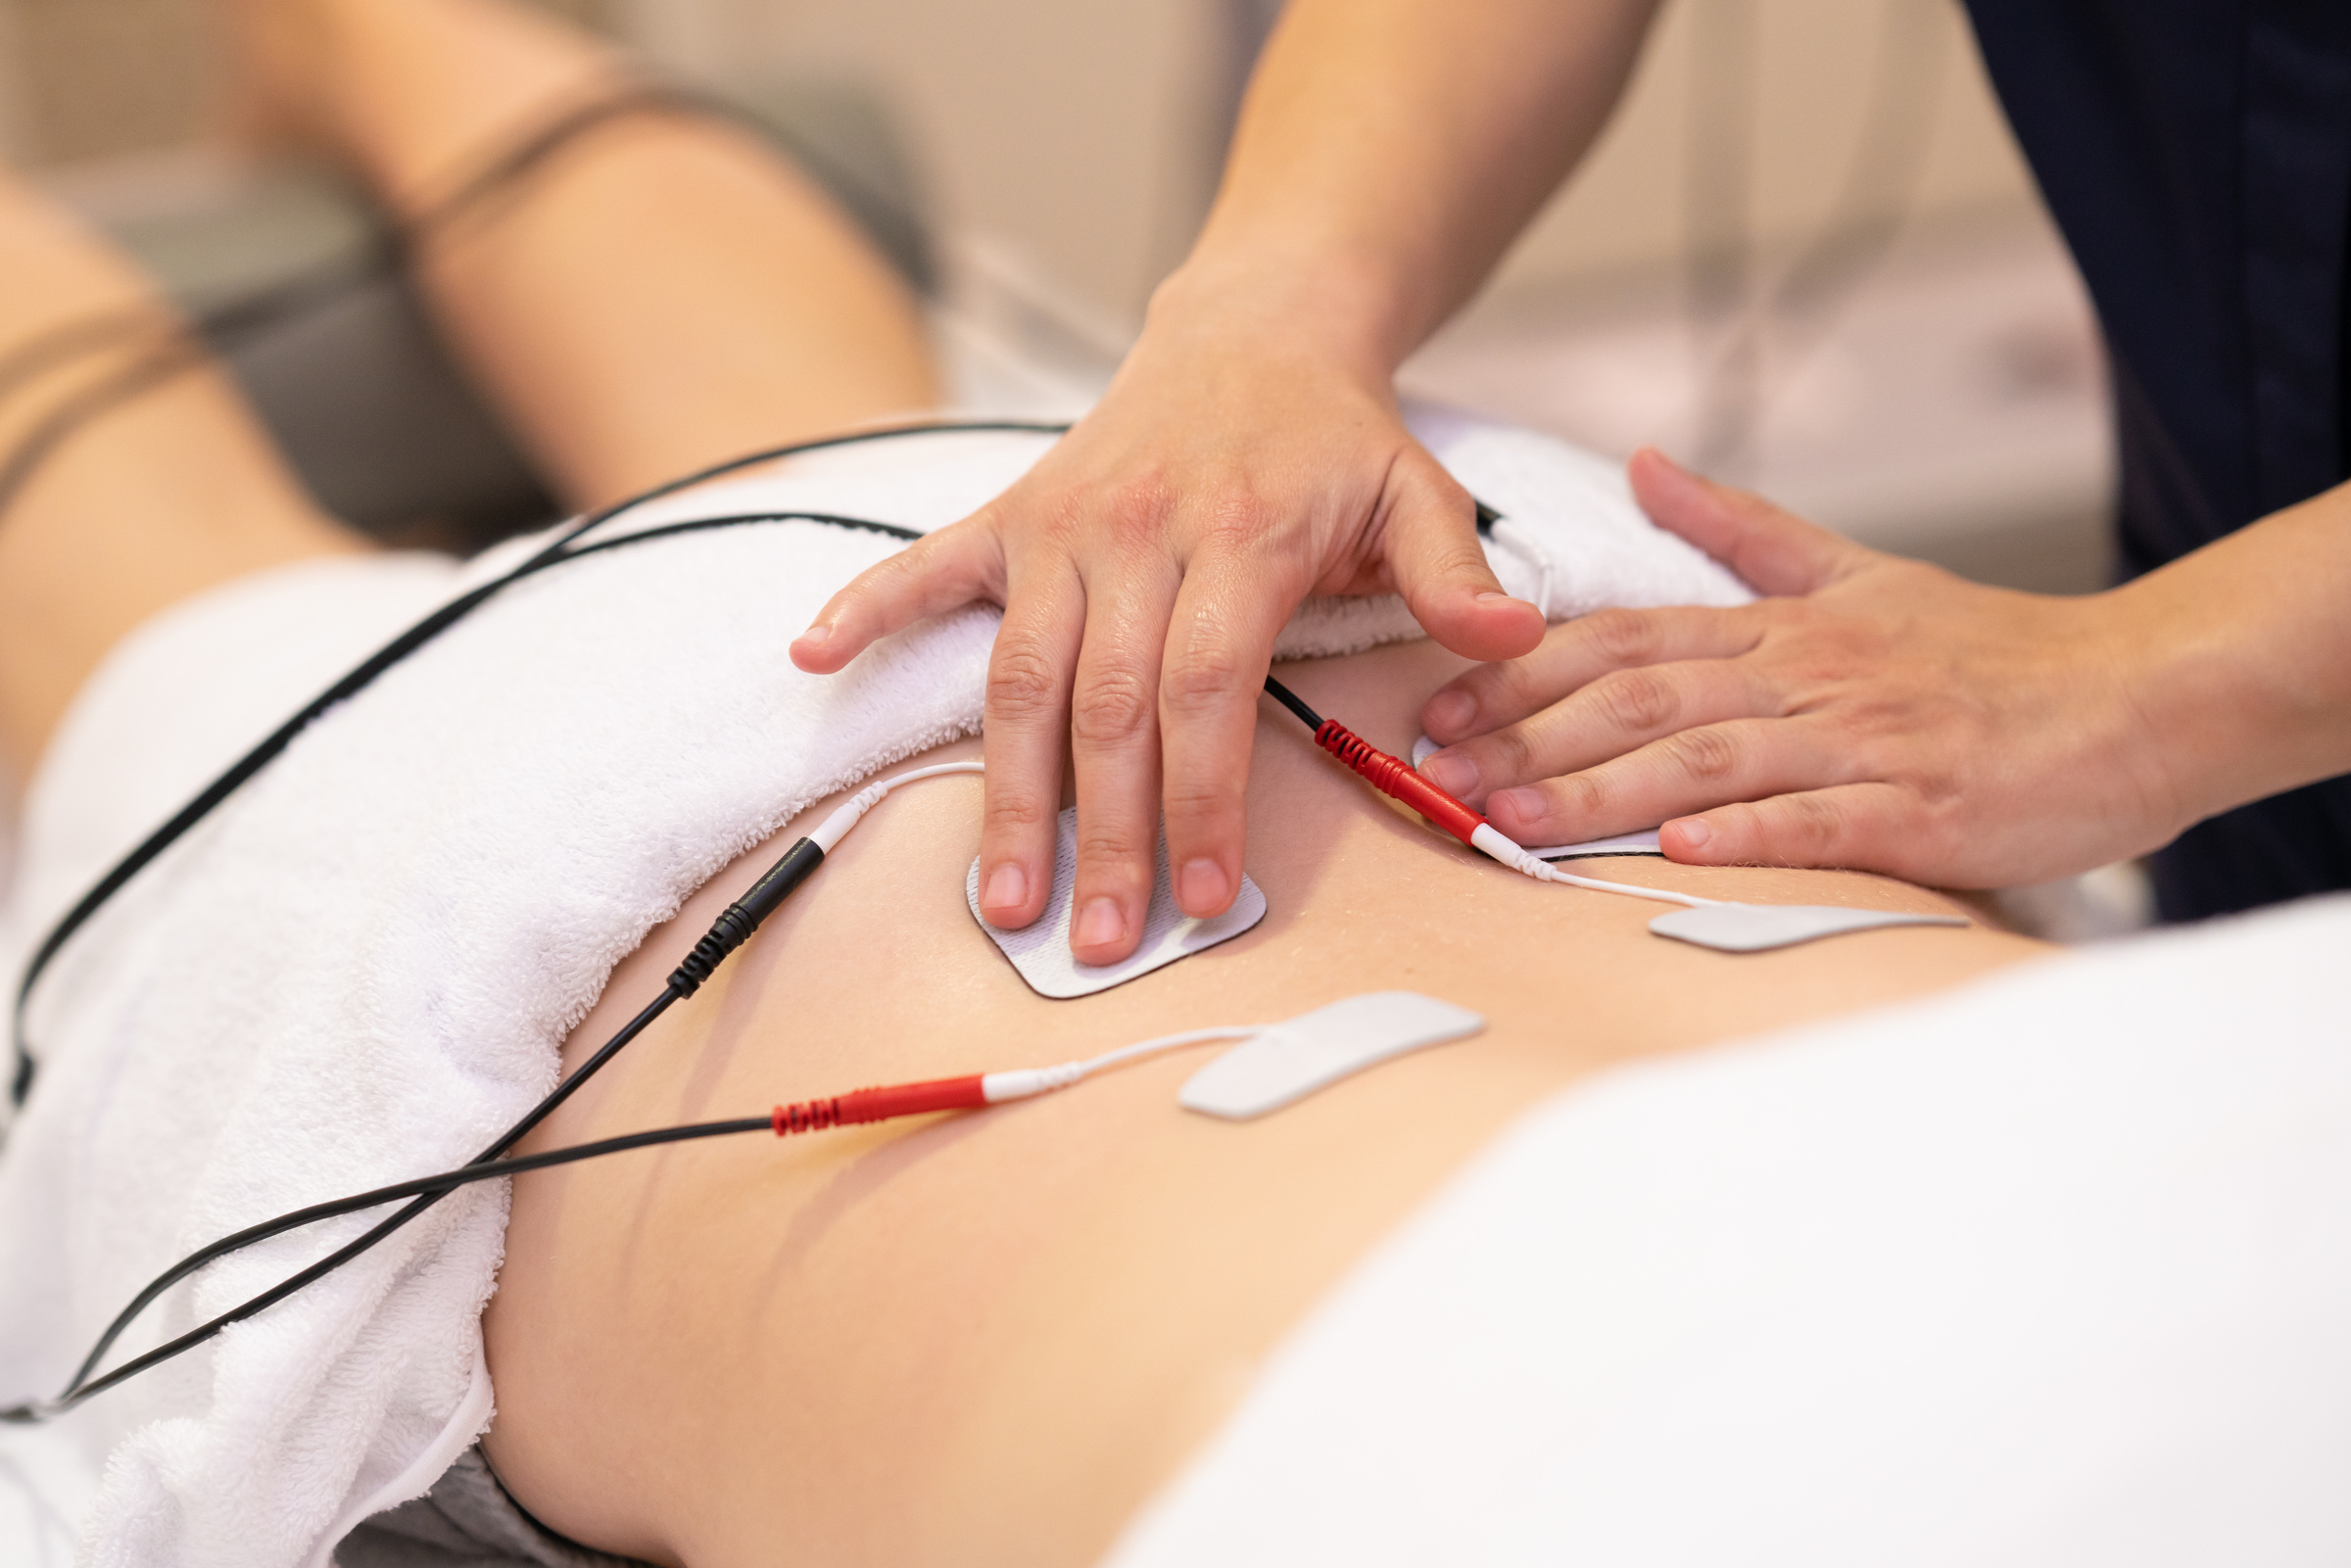 Electric Stimulation Physical Therapy